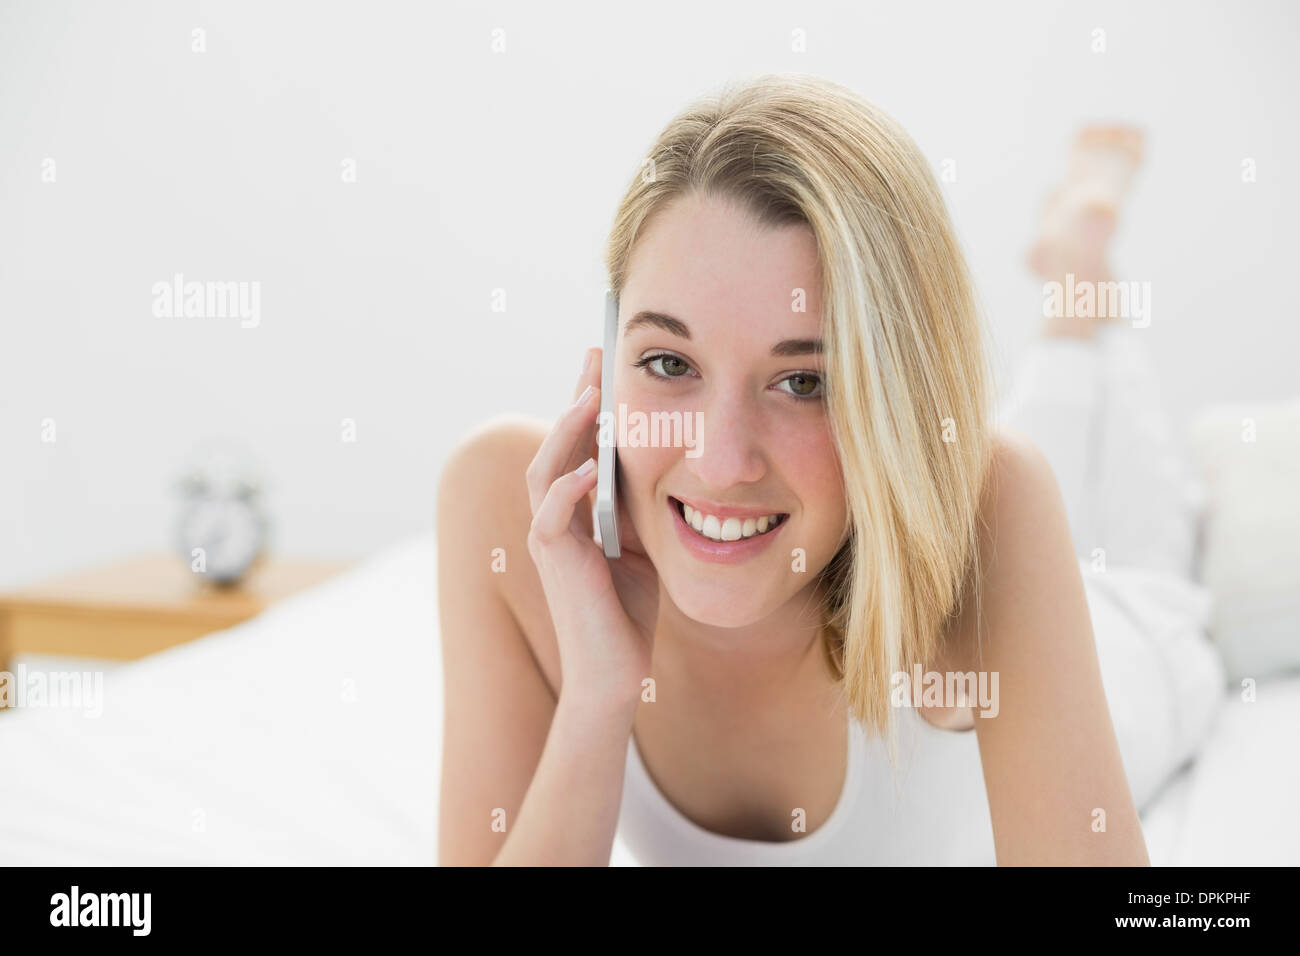 Gleeful young woman smiling at camera while phoning with her smartphone Stock Photo